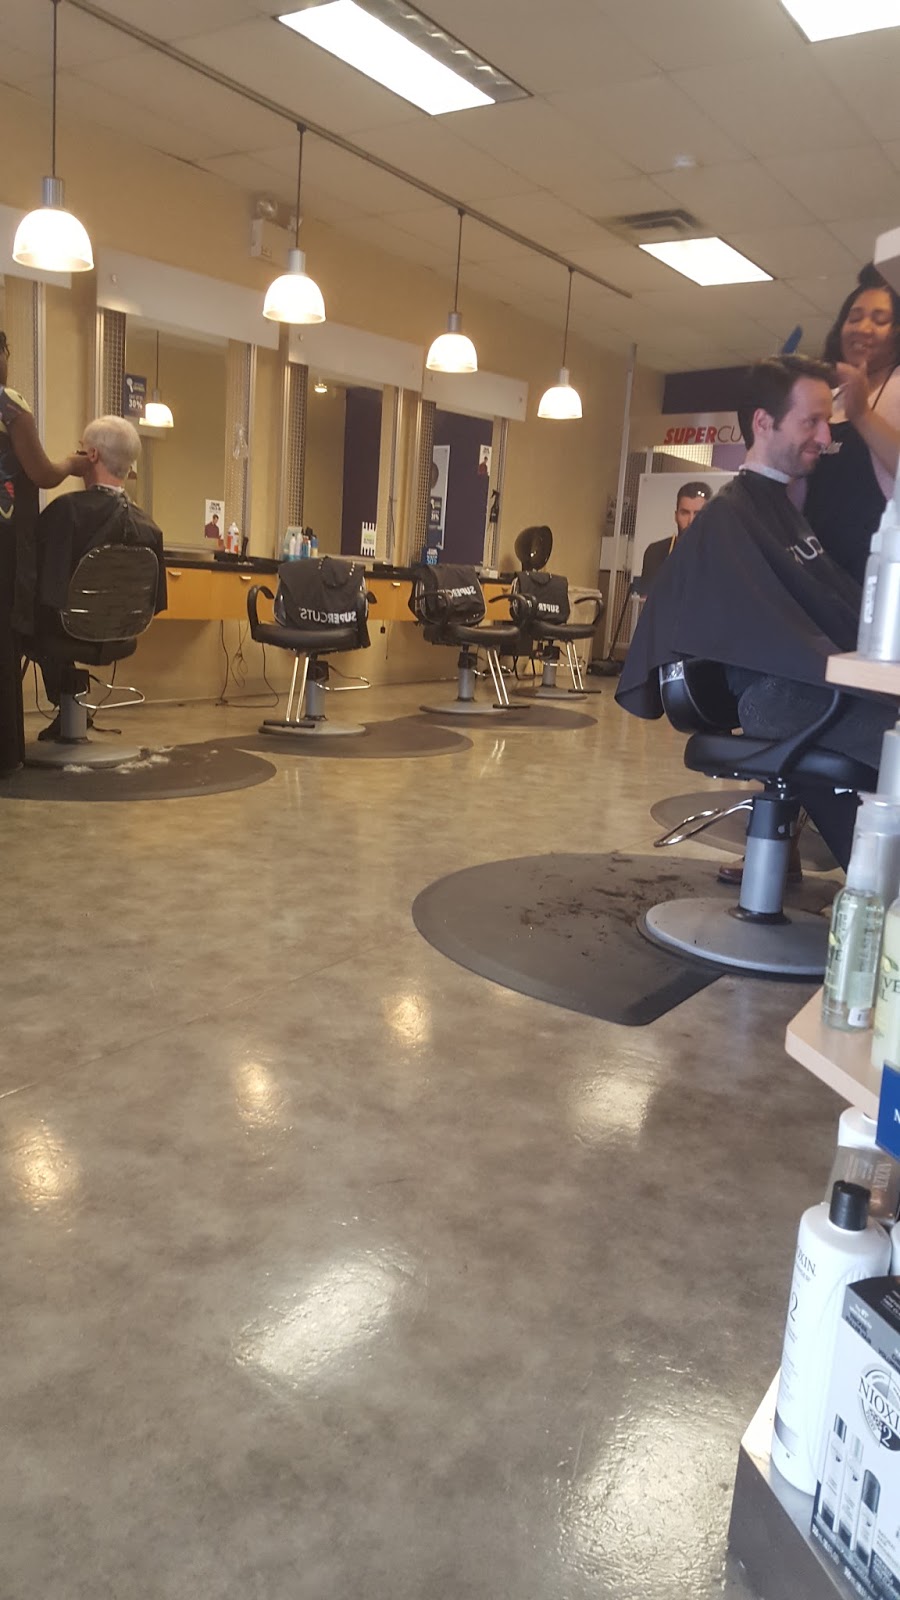 Supercuts | 658 Central Park Ave, Scarsdale, NY 10583 | Phone: (914) 472-0202